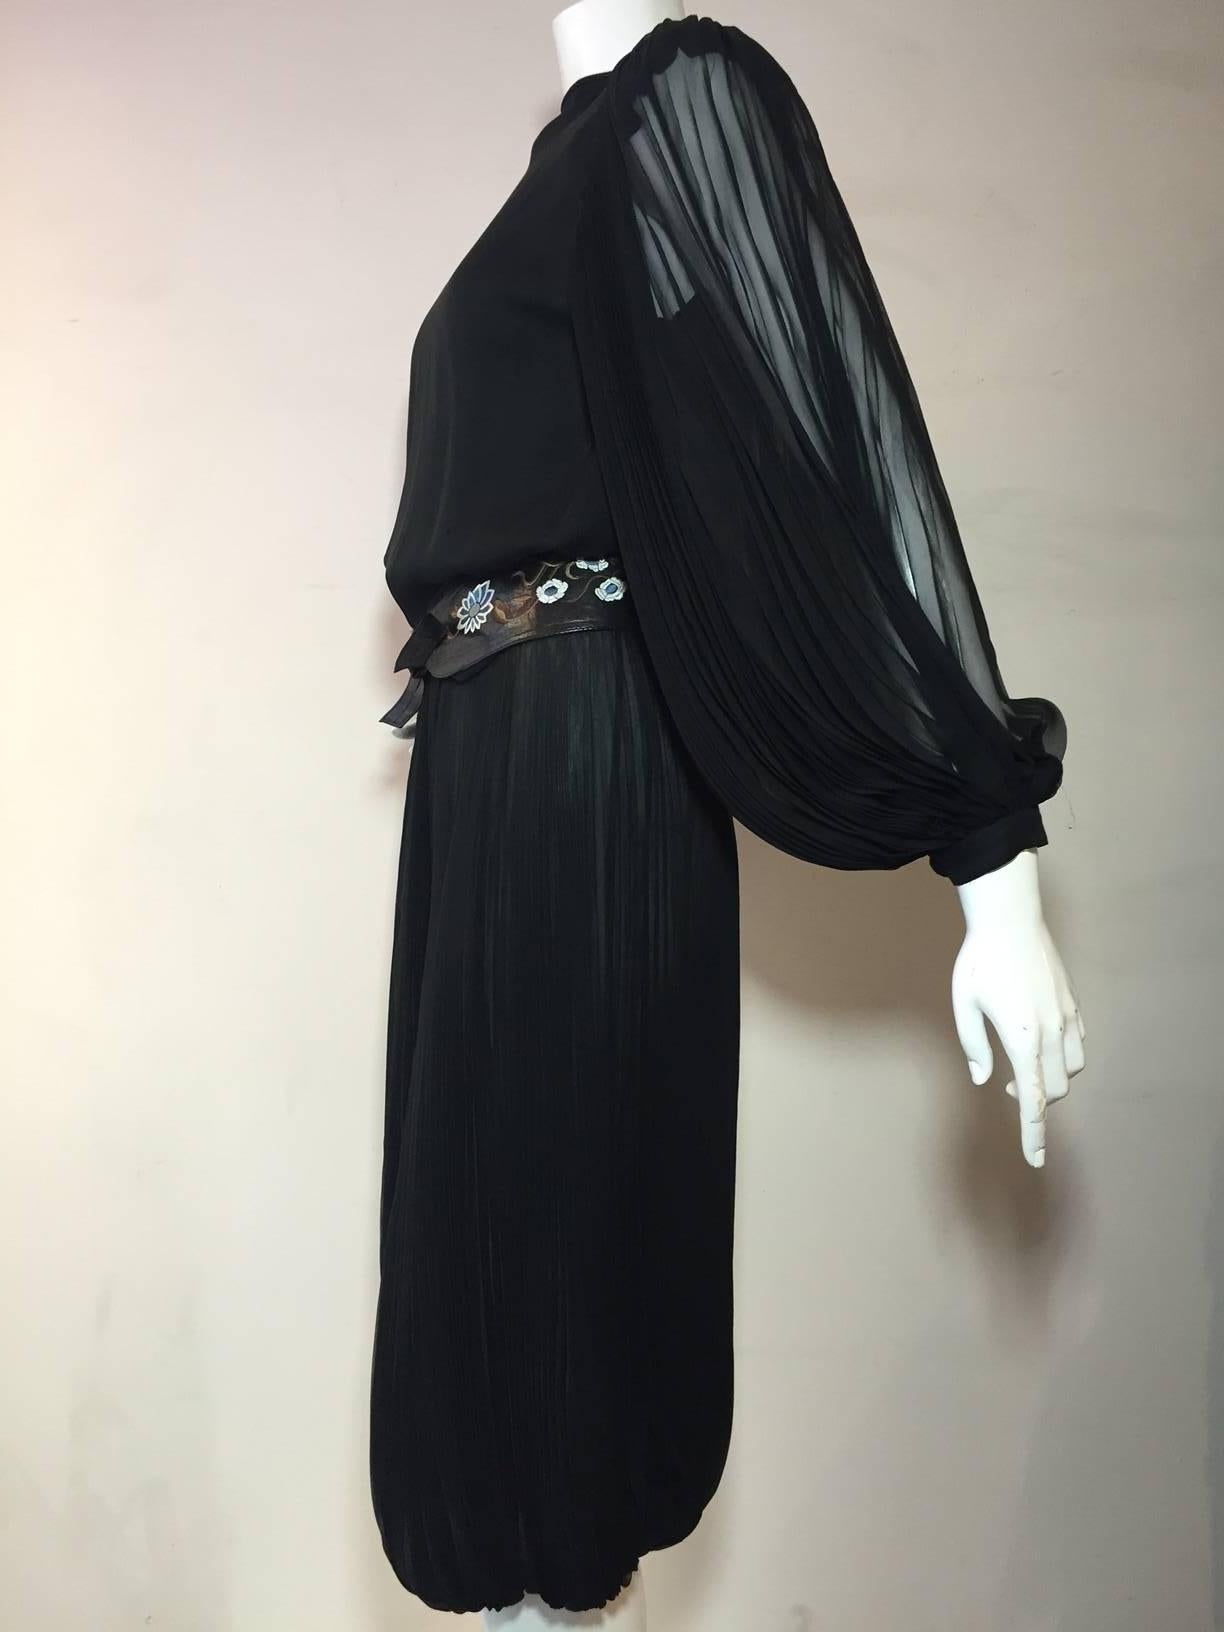 A fabulous 1970s James Galanos gaucho jumpsuit:  Black silk chiffon heavily pleated and elasticized at the calf.  Buttons down the back. Includes tooled leather tie belt (not original).